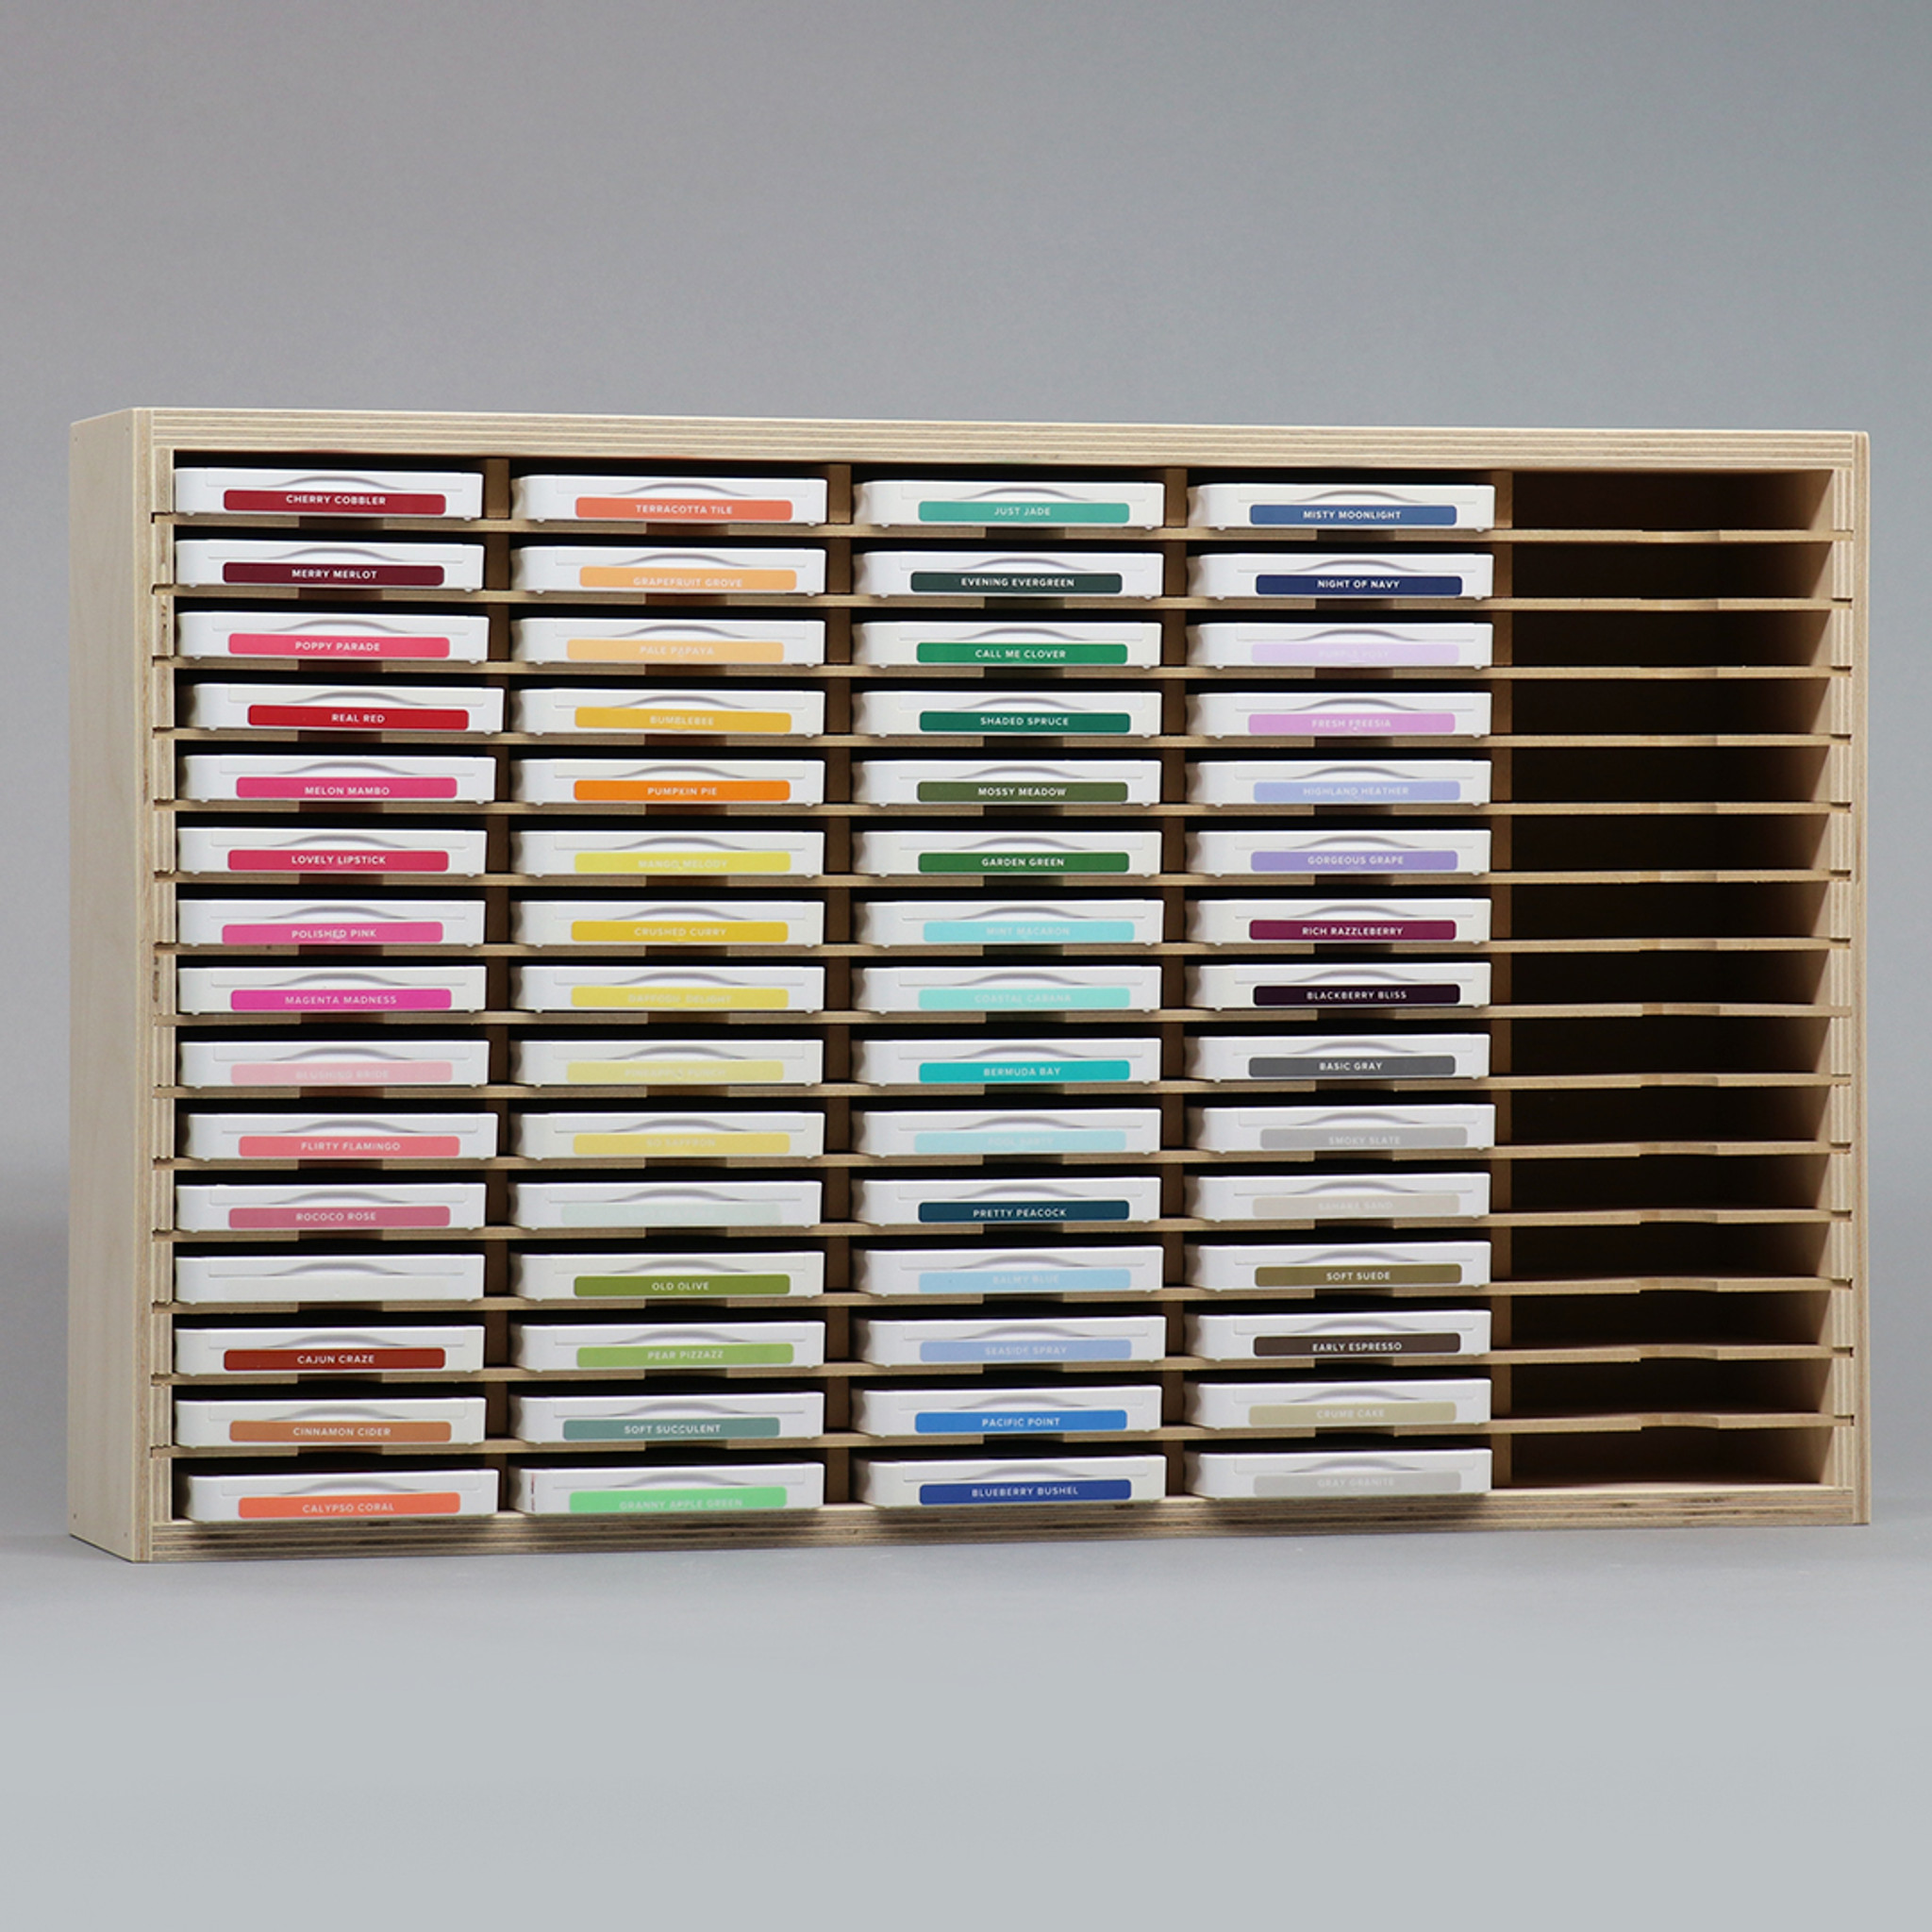 Ink Pad Storage Comparison: 60-Slot and 75-Slot Ink Pad Holders